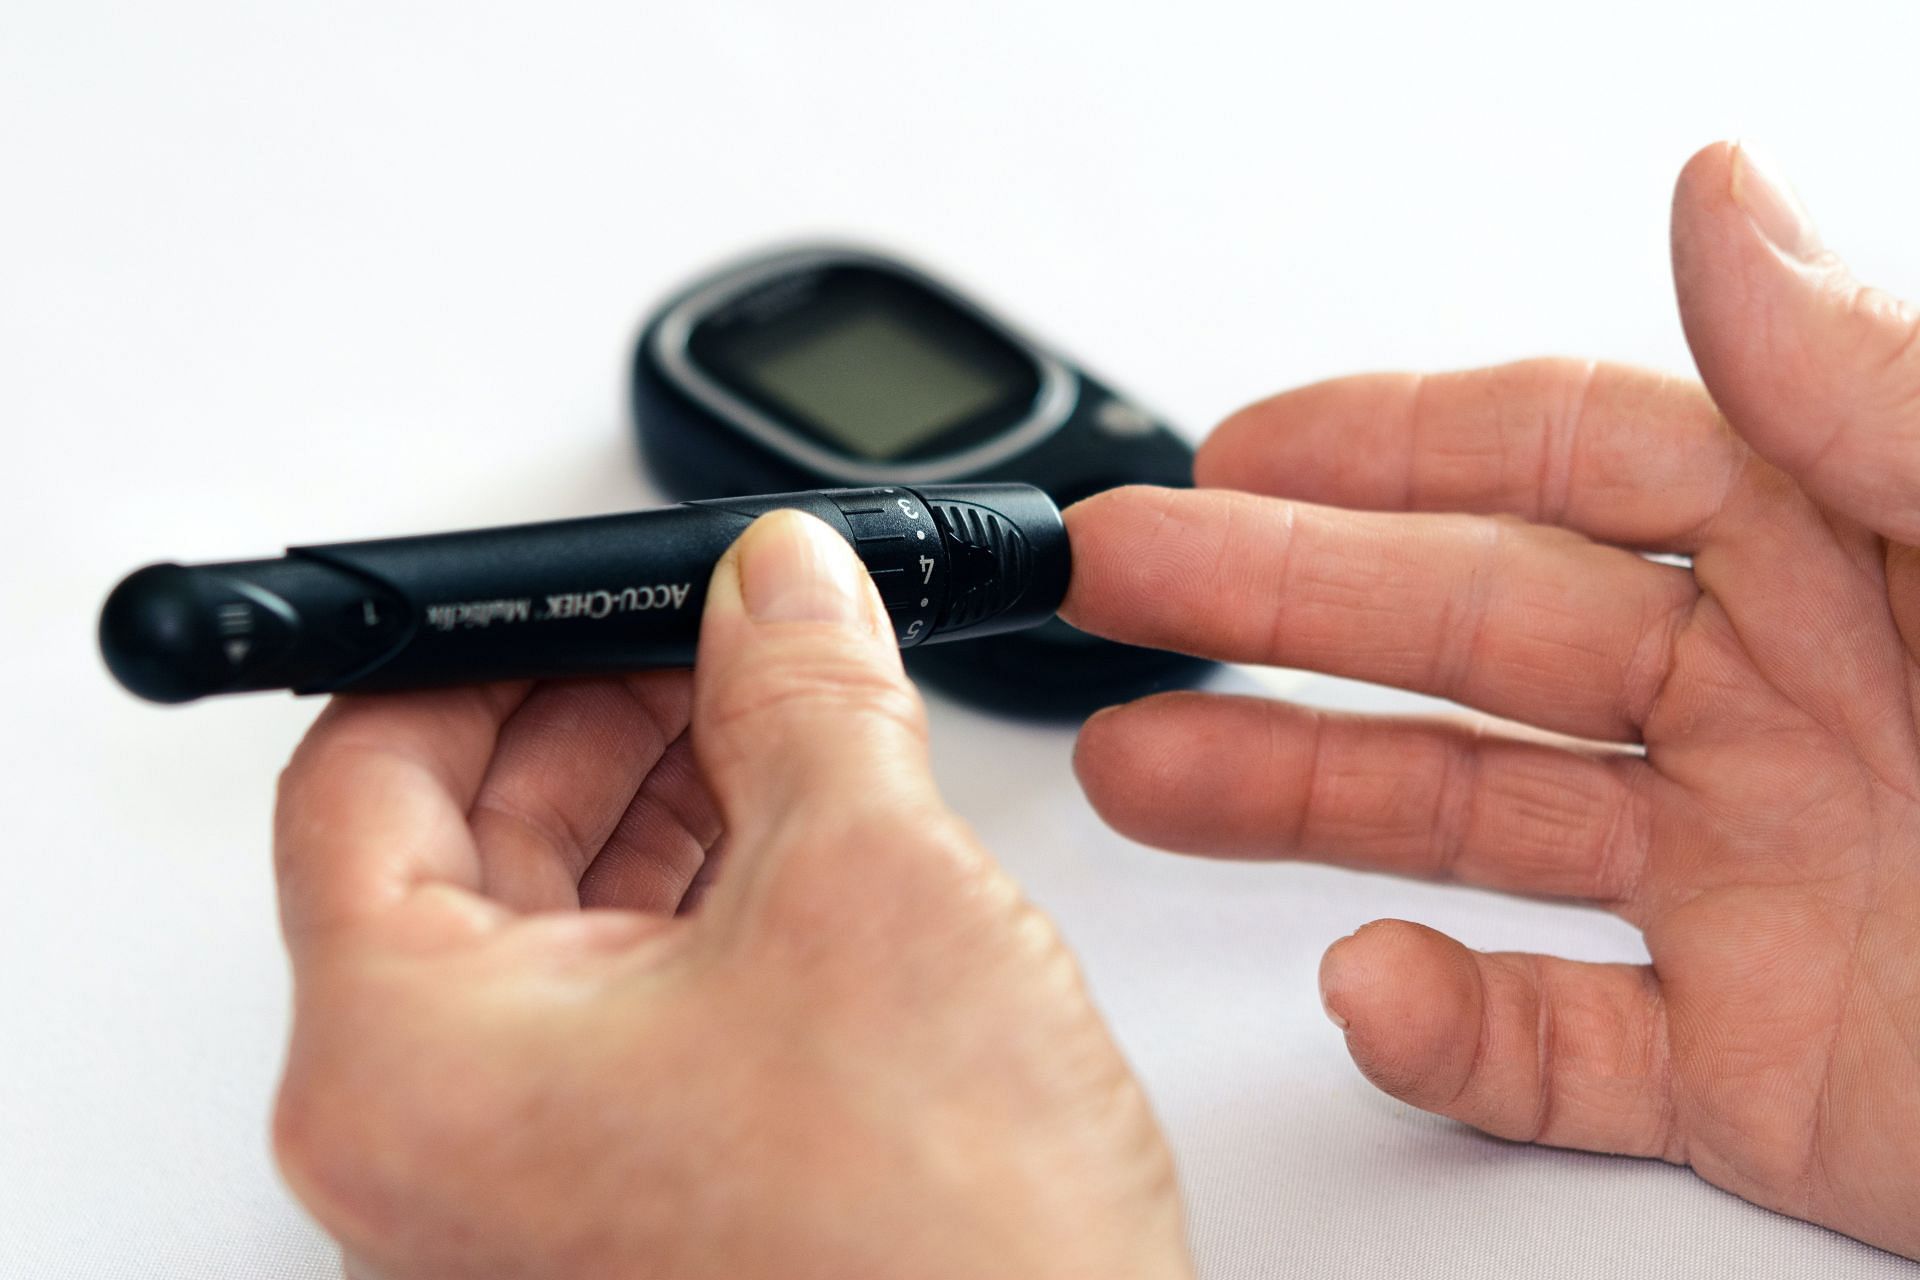 Intermittent fasting can also help reduce blood sugar levels, but you should consult your doctor before doing this if you are diabetic (Image via Pexels @Photomix Company)